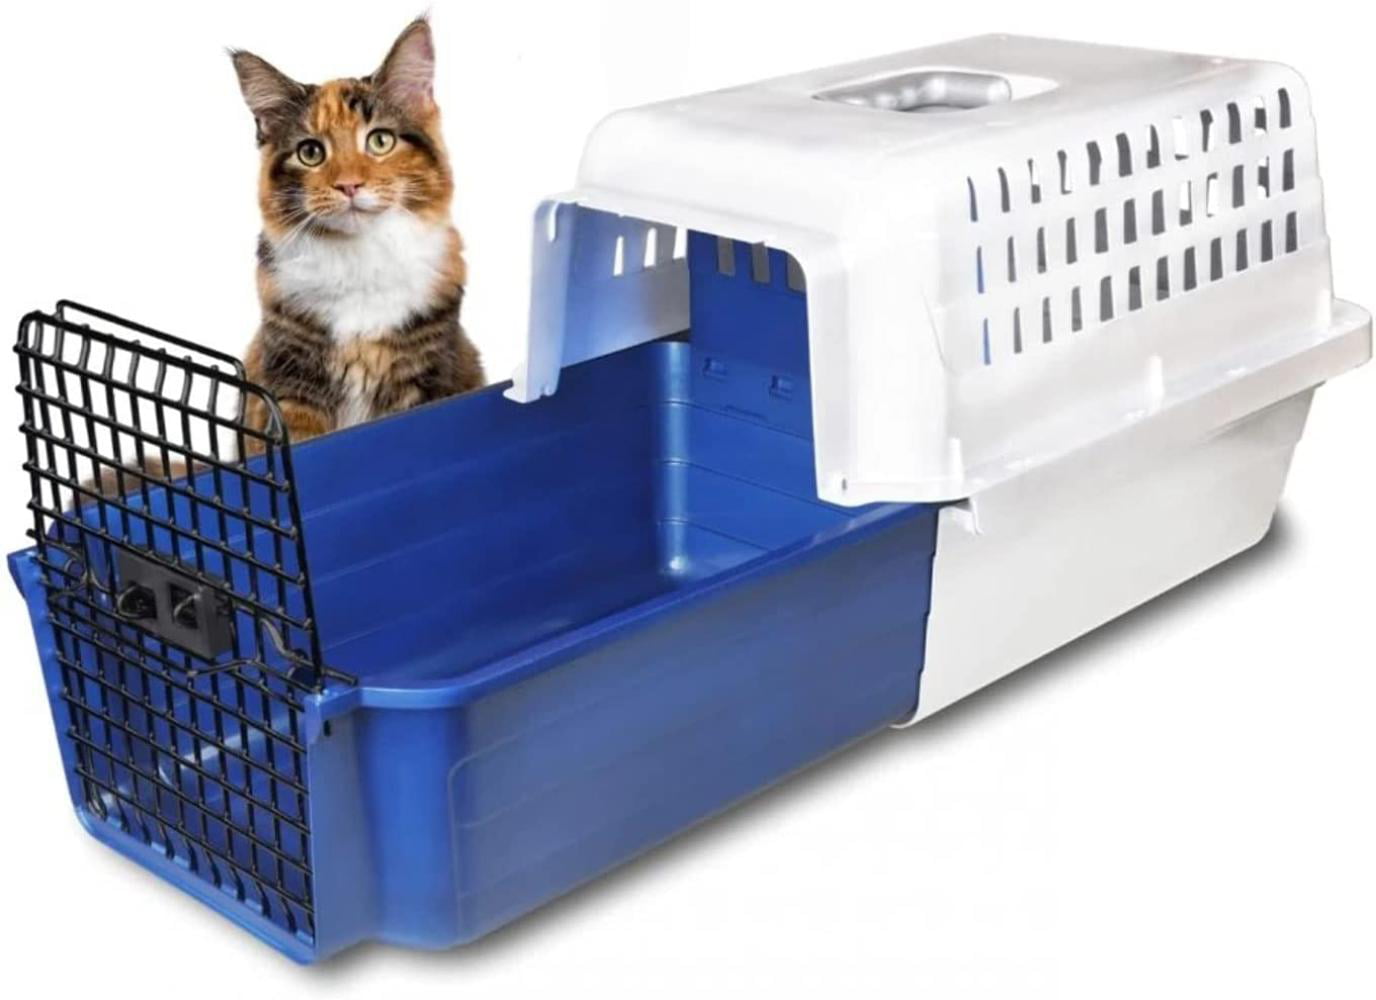 Guilt-Free Anxiety Easy-to-Clean Pet Travel Carrier Cat Carrier Pet Carrier Calm Carrier and Stress Easy Load Drawer Durable Reduces Fear Van Ness Airline Compliant Carrier 